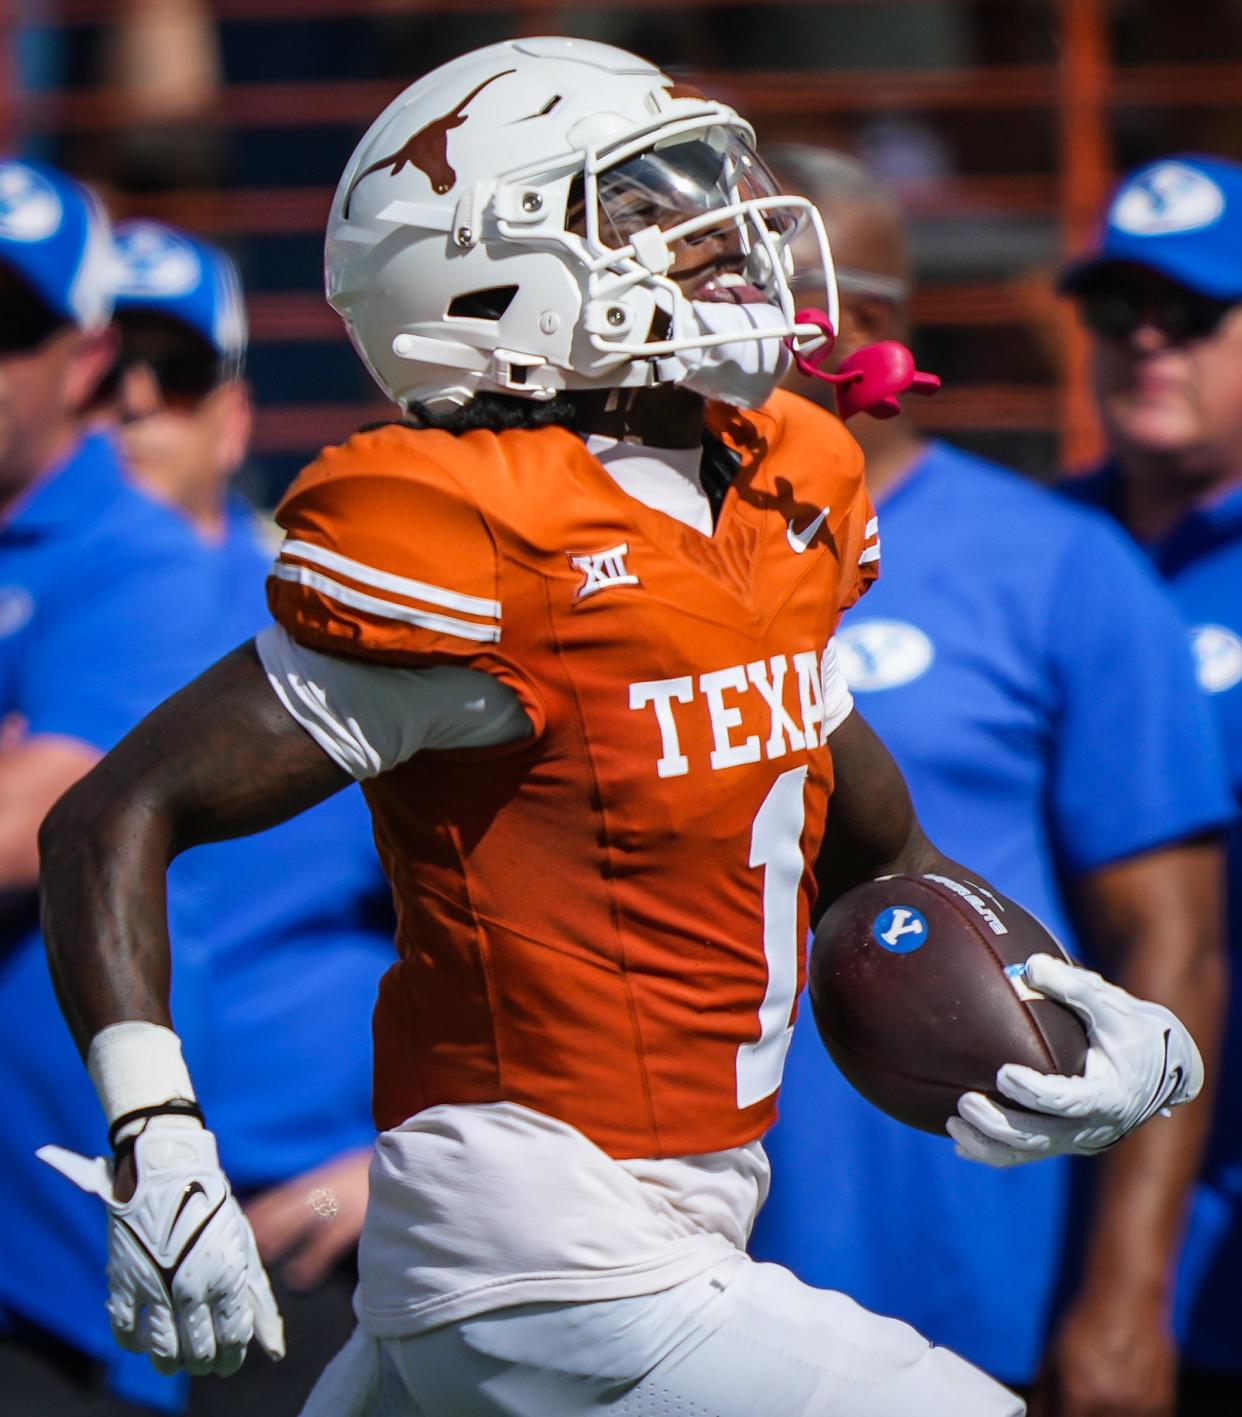 Texas wideout Xavier Worthy parlayed a record 4.21-second time in the 40-yard dash at the NFL scouting combine into a selection in the first round of the draft. The Kansas City Chiefs traded up Thursday night to pick him 28th overall and pair him with quarterback Patrick Mahomes.